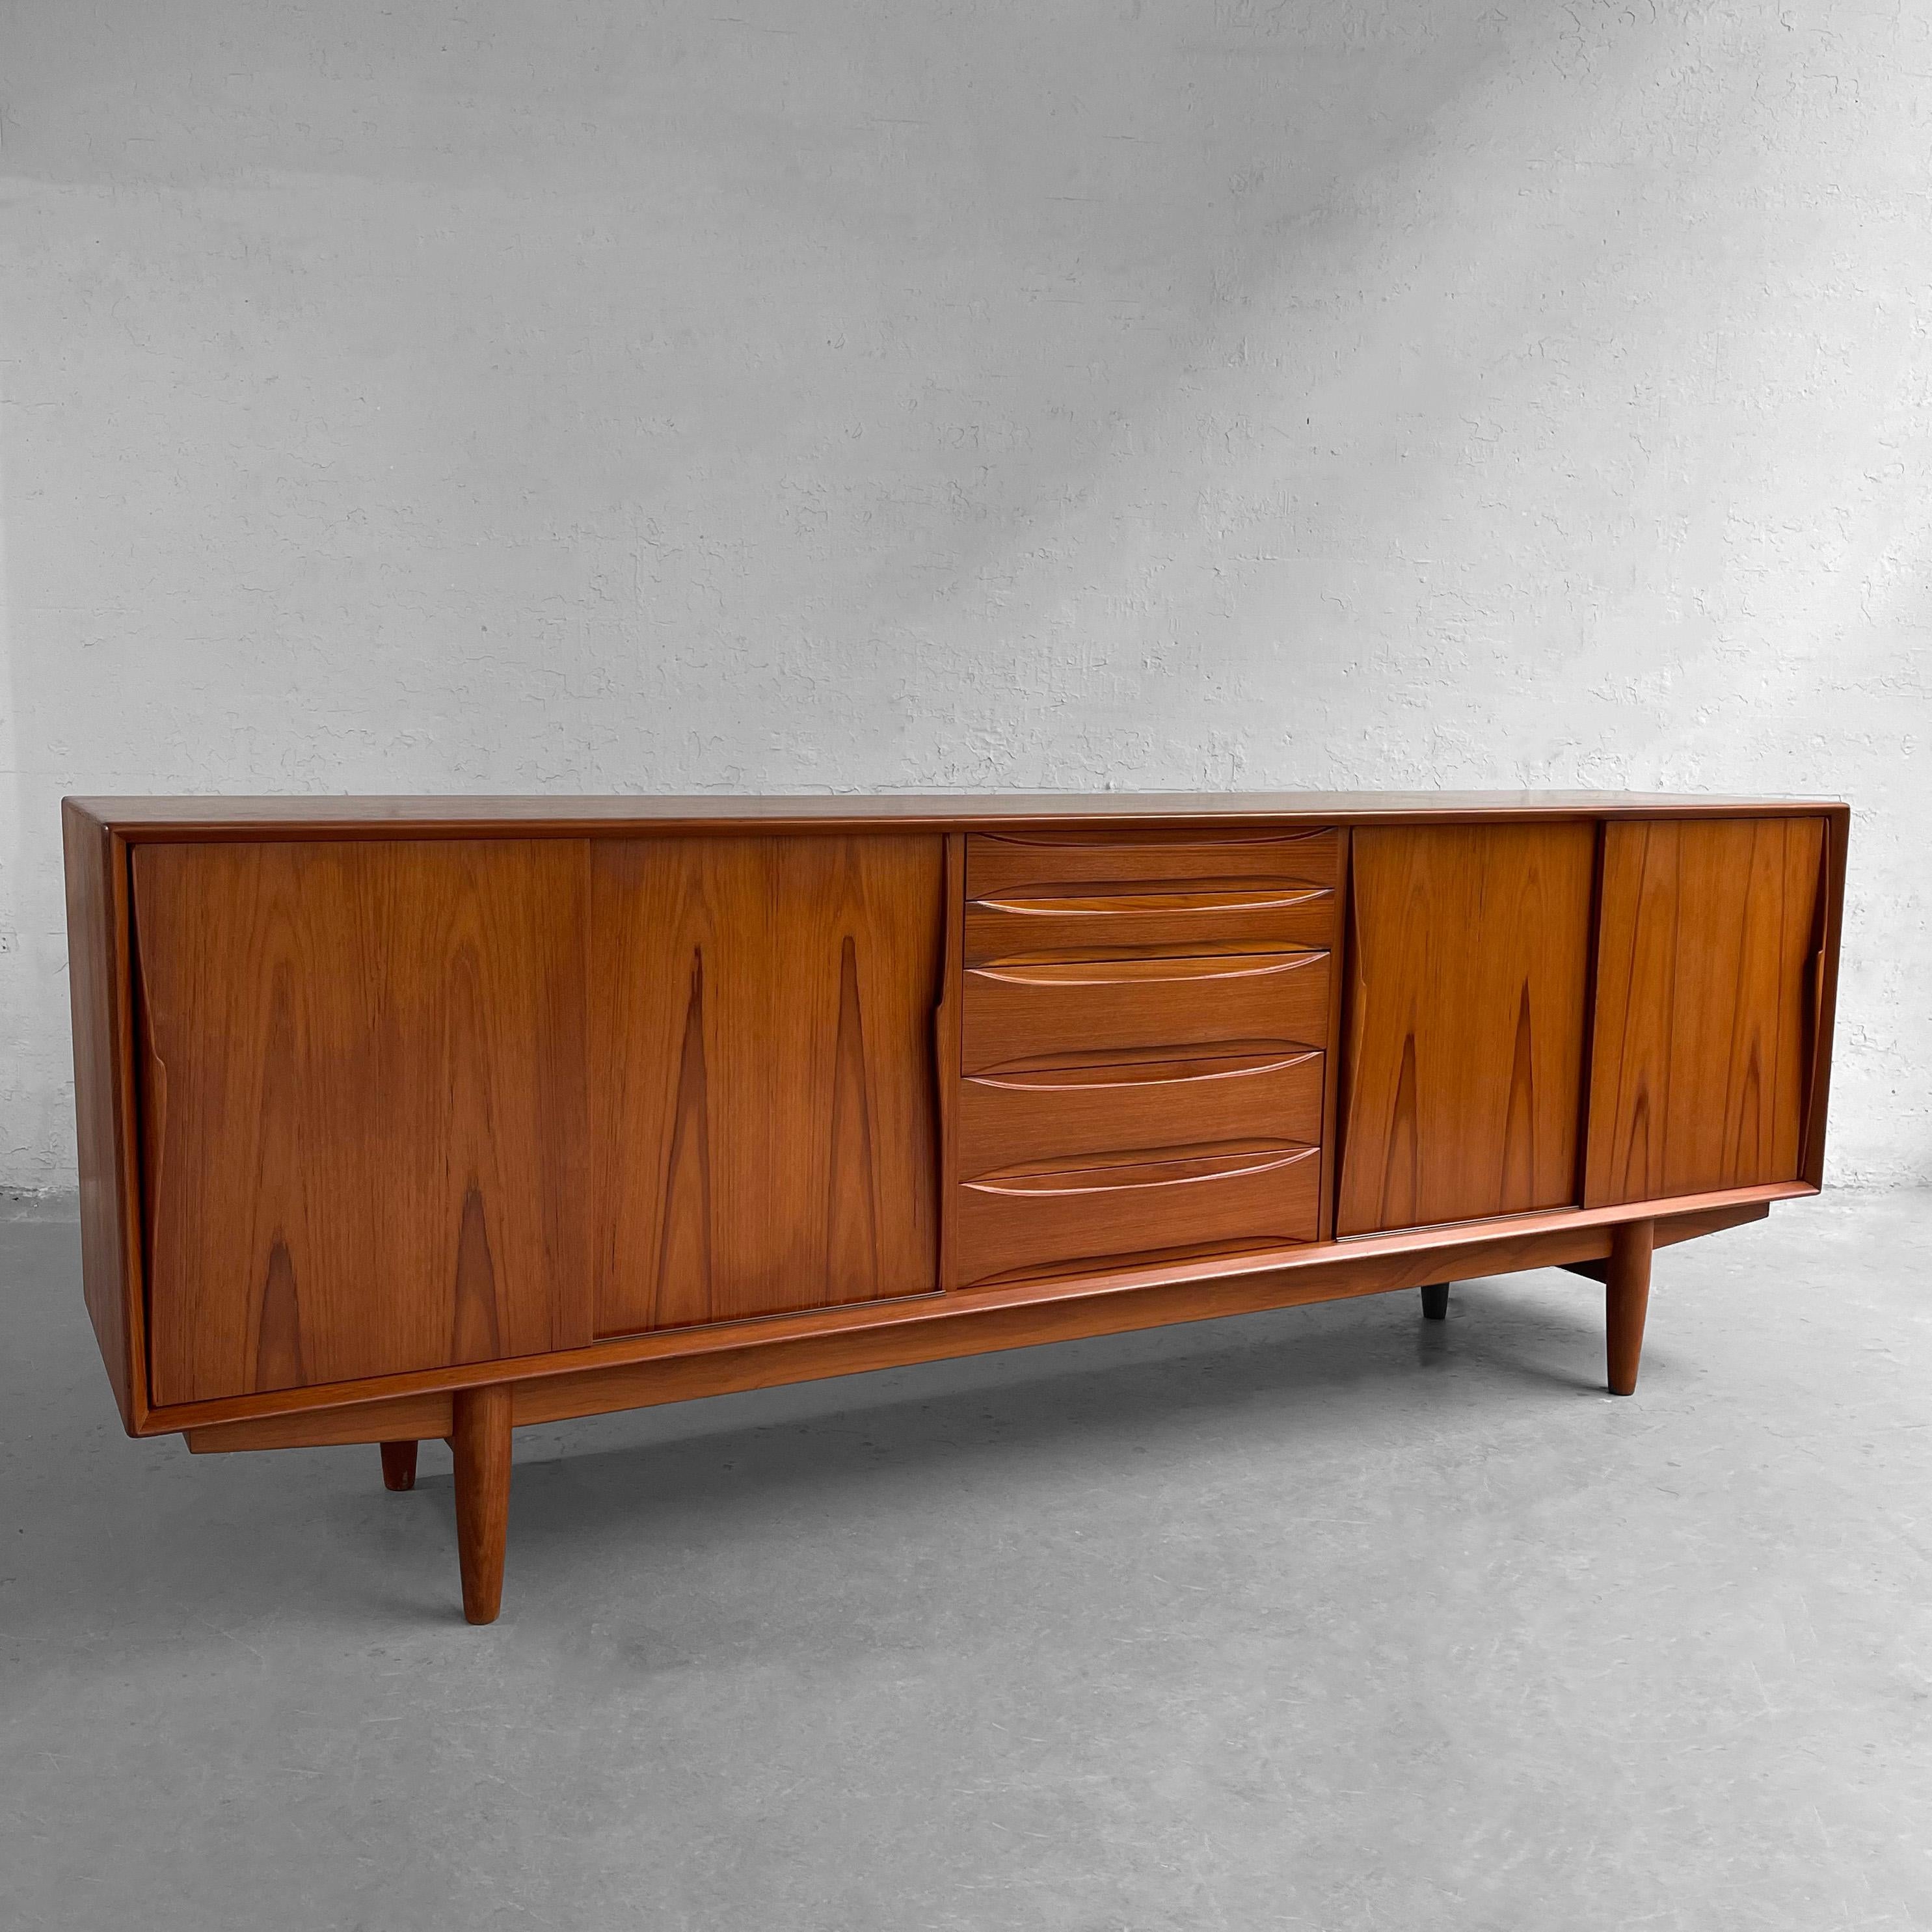 Wonderfully detailed, classic, Scandinavian modern, teak credenza, sideboard by Dyrlund features center drawers with deocrative, recessed pulls and sliding door cabinet storage on either side with adjustable interior shelves.
 